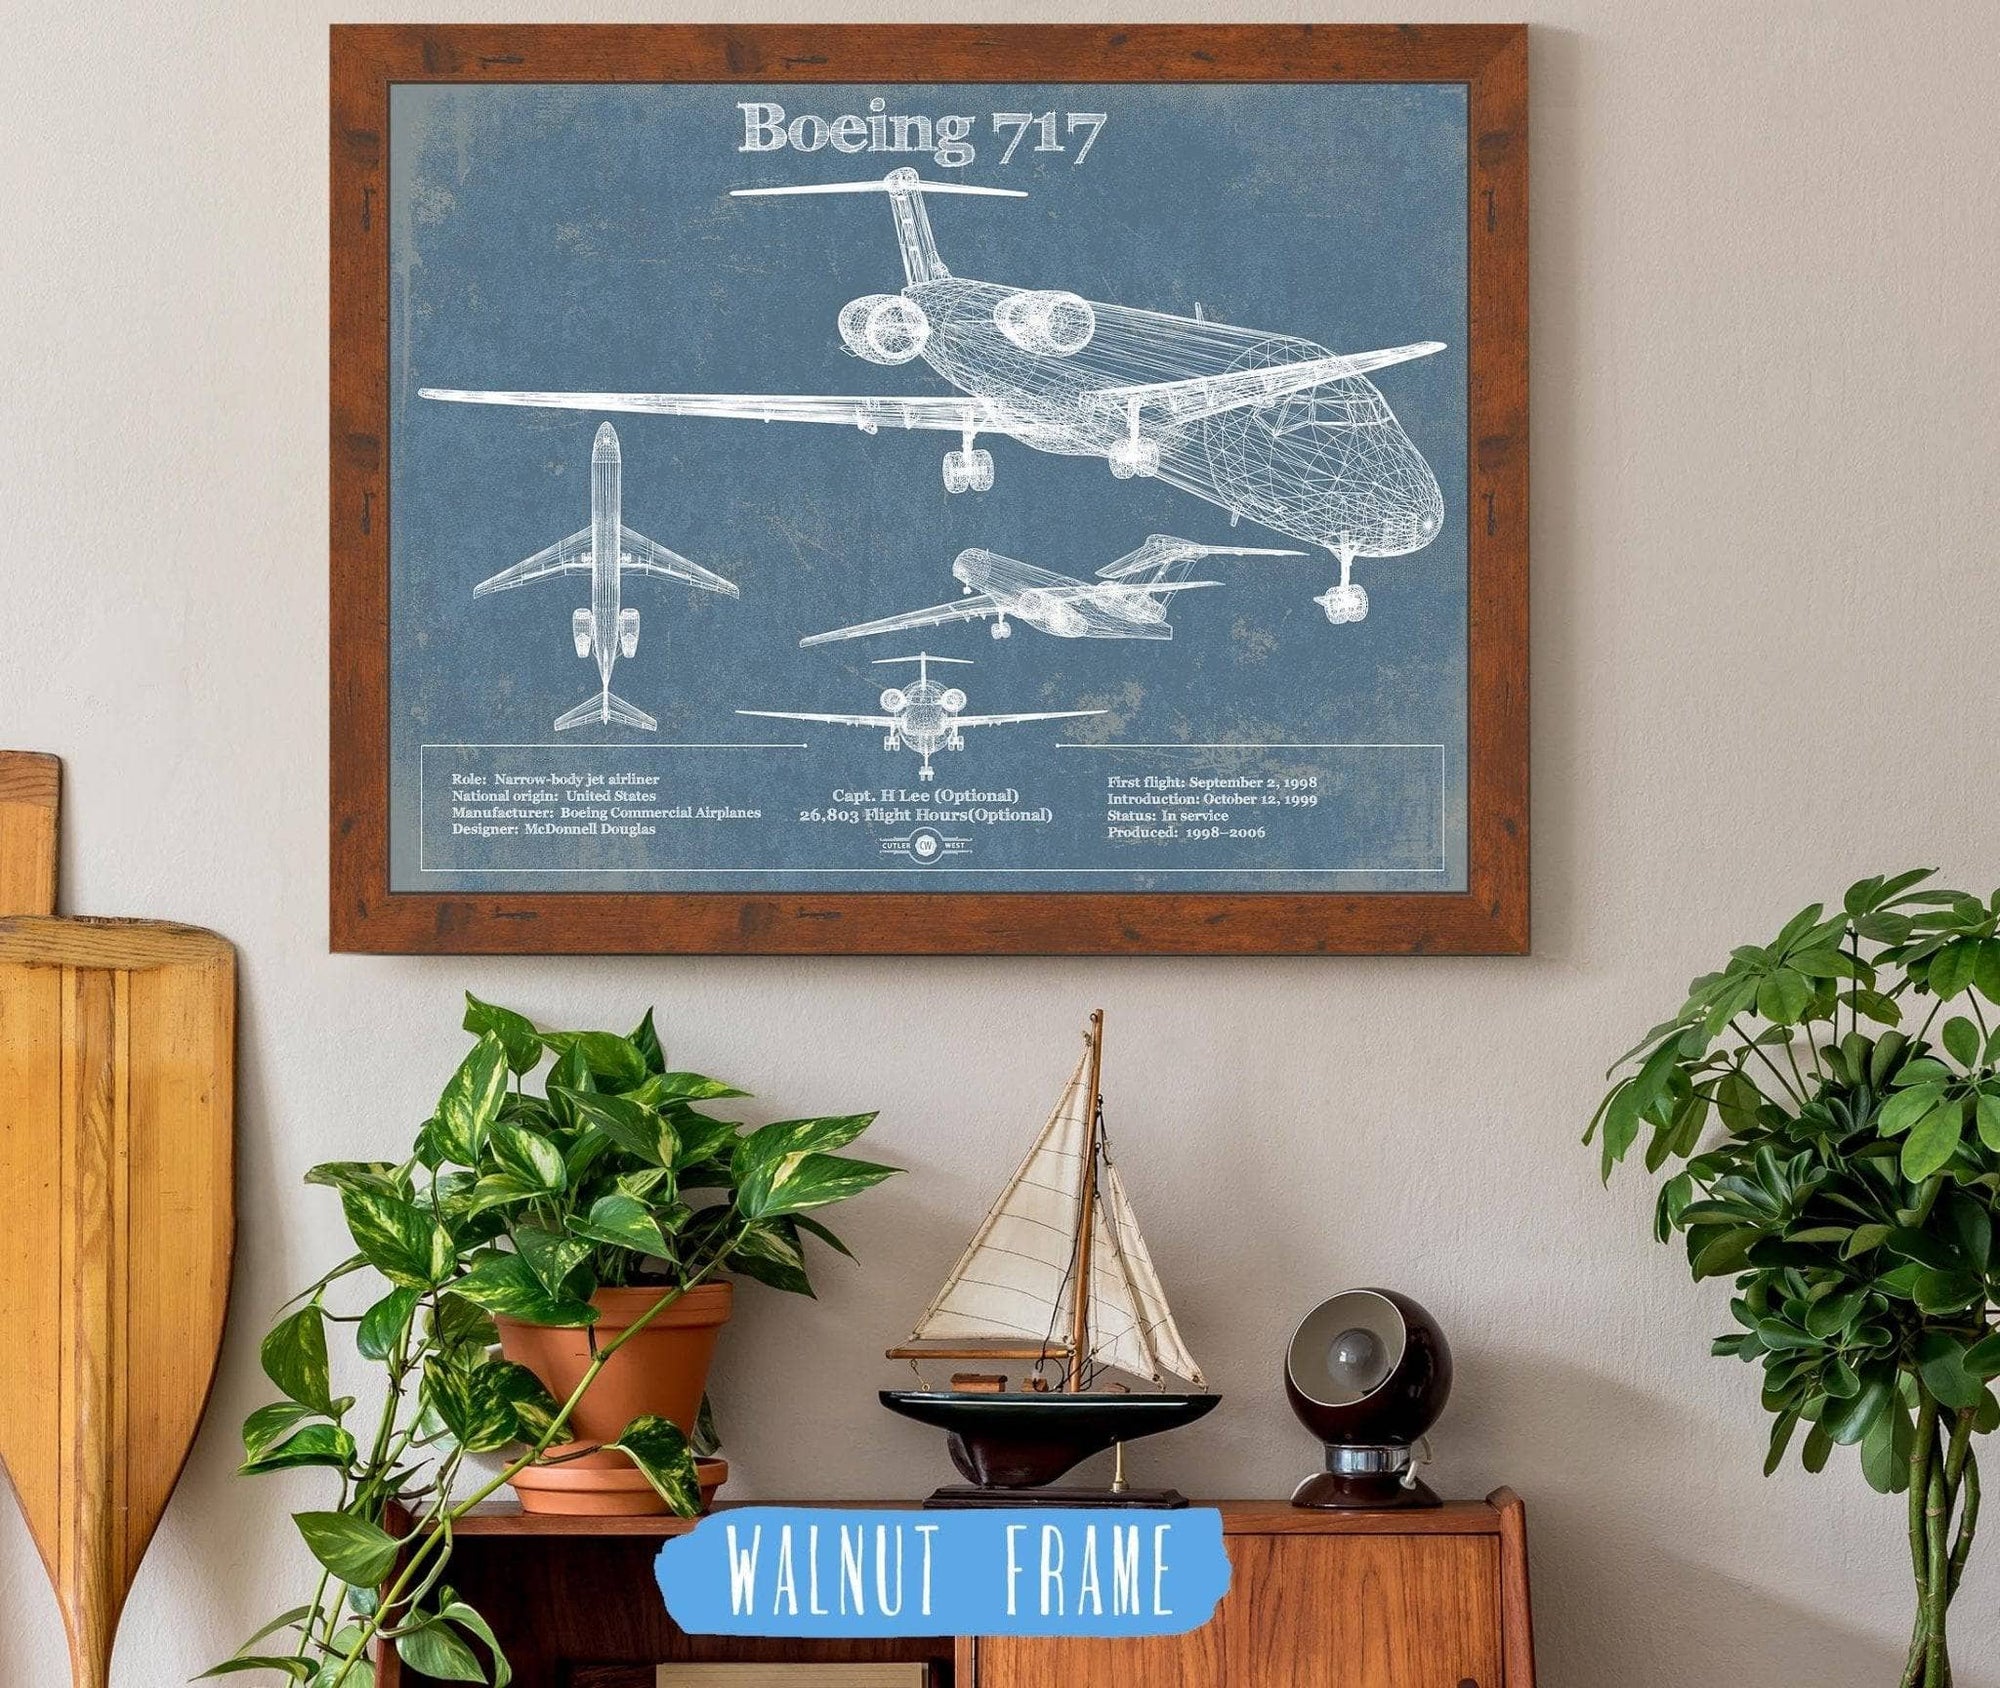 Cutler West Boeing Collection 14" x 11" / Walnut Frame Boeing 717 Vintage Aviation Blueprint Print - Custom Pilot Name Can Be Added 840189113_48476